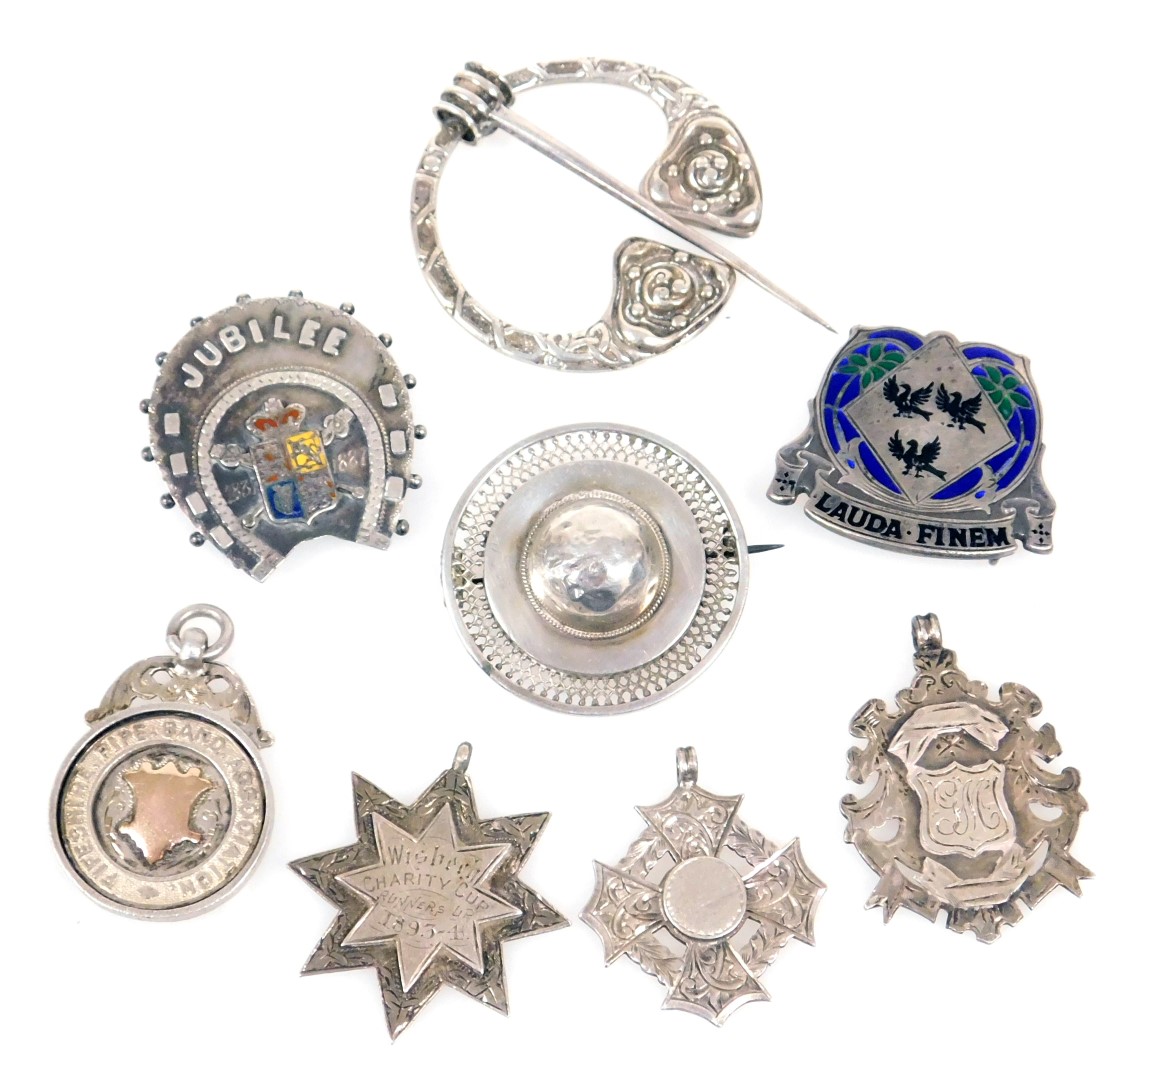 Victorian and later silver brooches and medallions, including a silver and enamel buckle with moto "